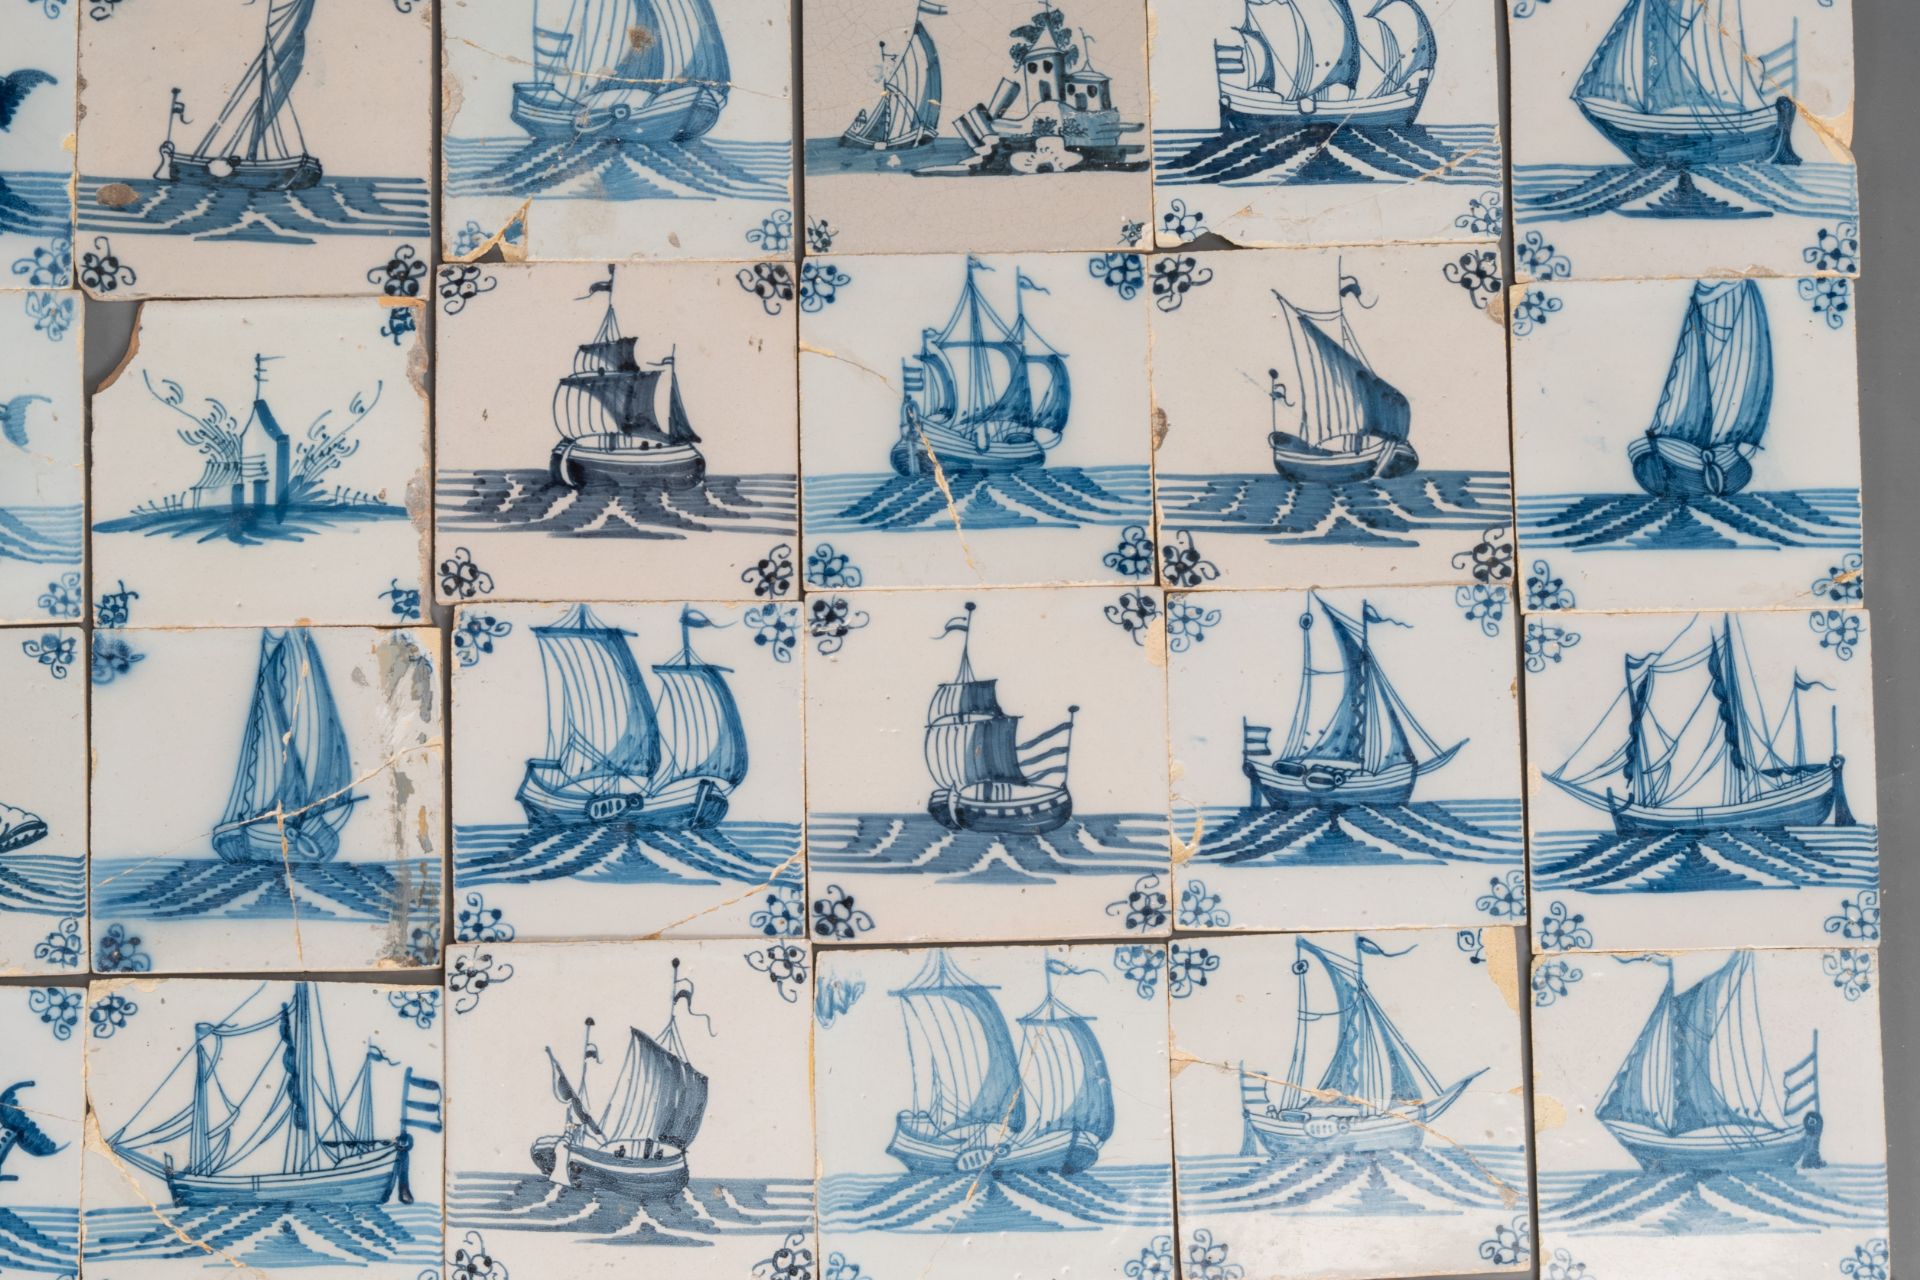 92 blue and white Dutch Delft tiles with sea monsters and ships, 18th C. - Image 13 of 16